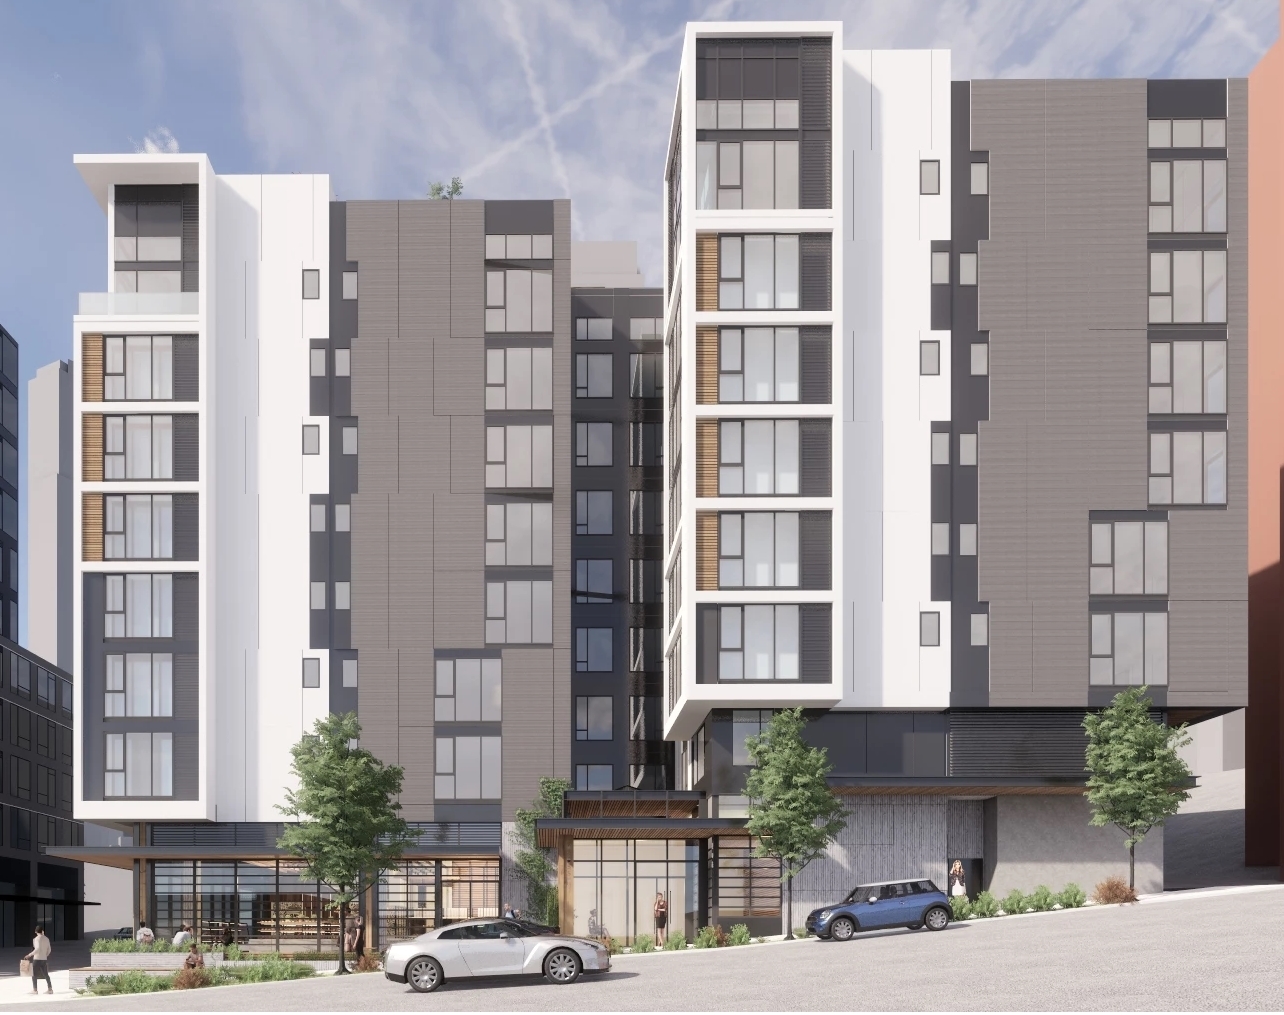 Western facade of proposed Blossom Apartments